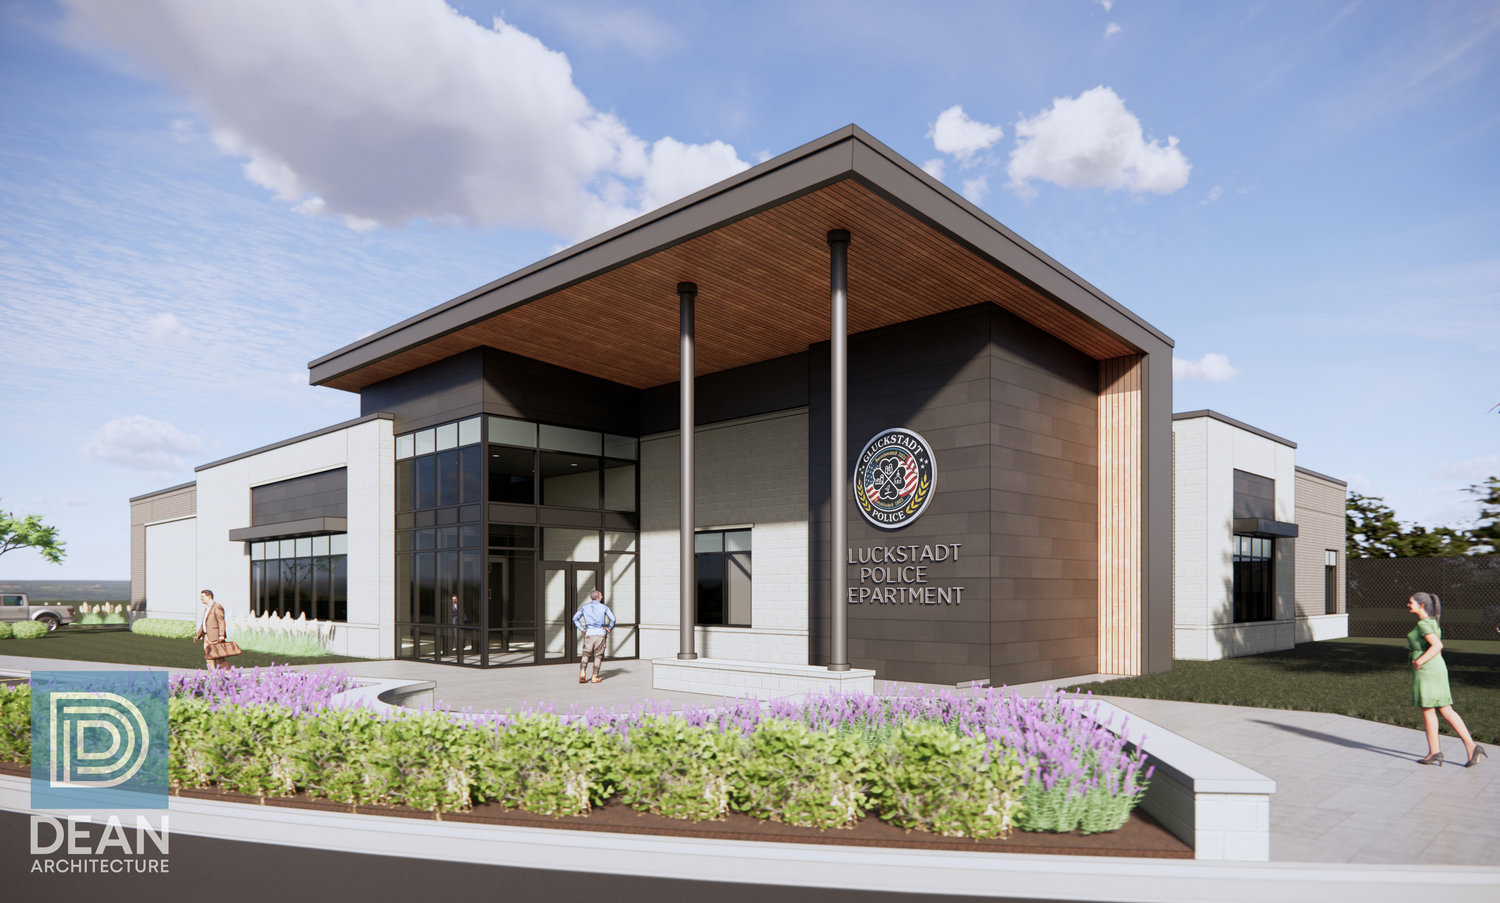 A conceptual rendering shows the vision for the new Gluckstadt Police Department.